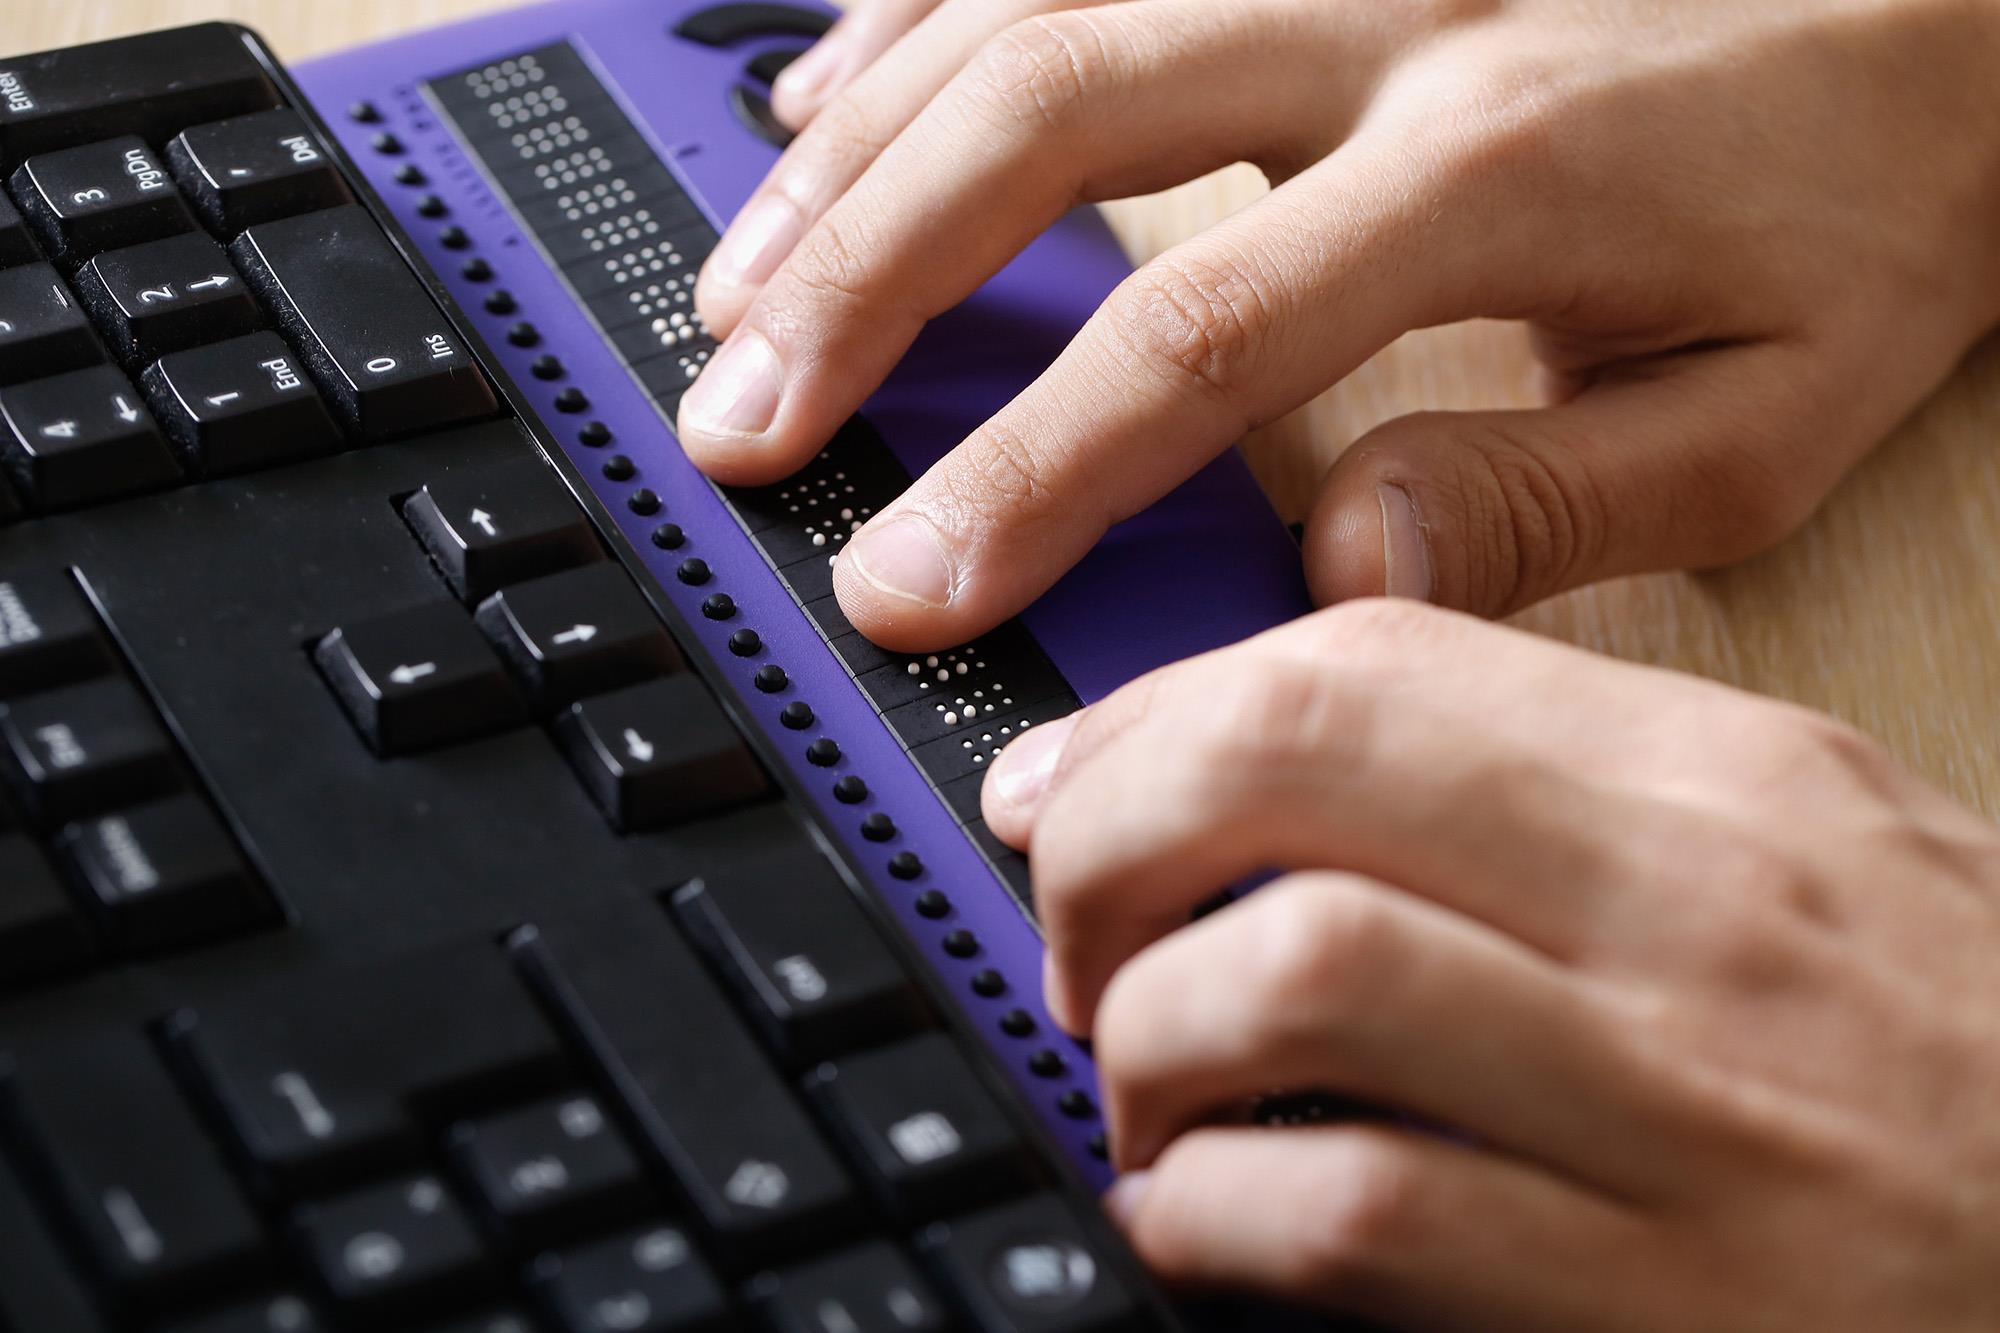 Person using a braille keyboard